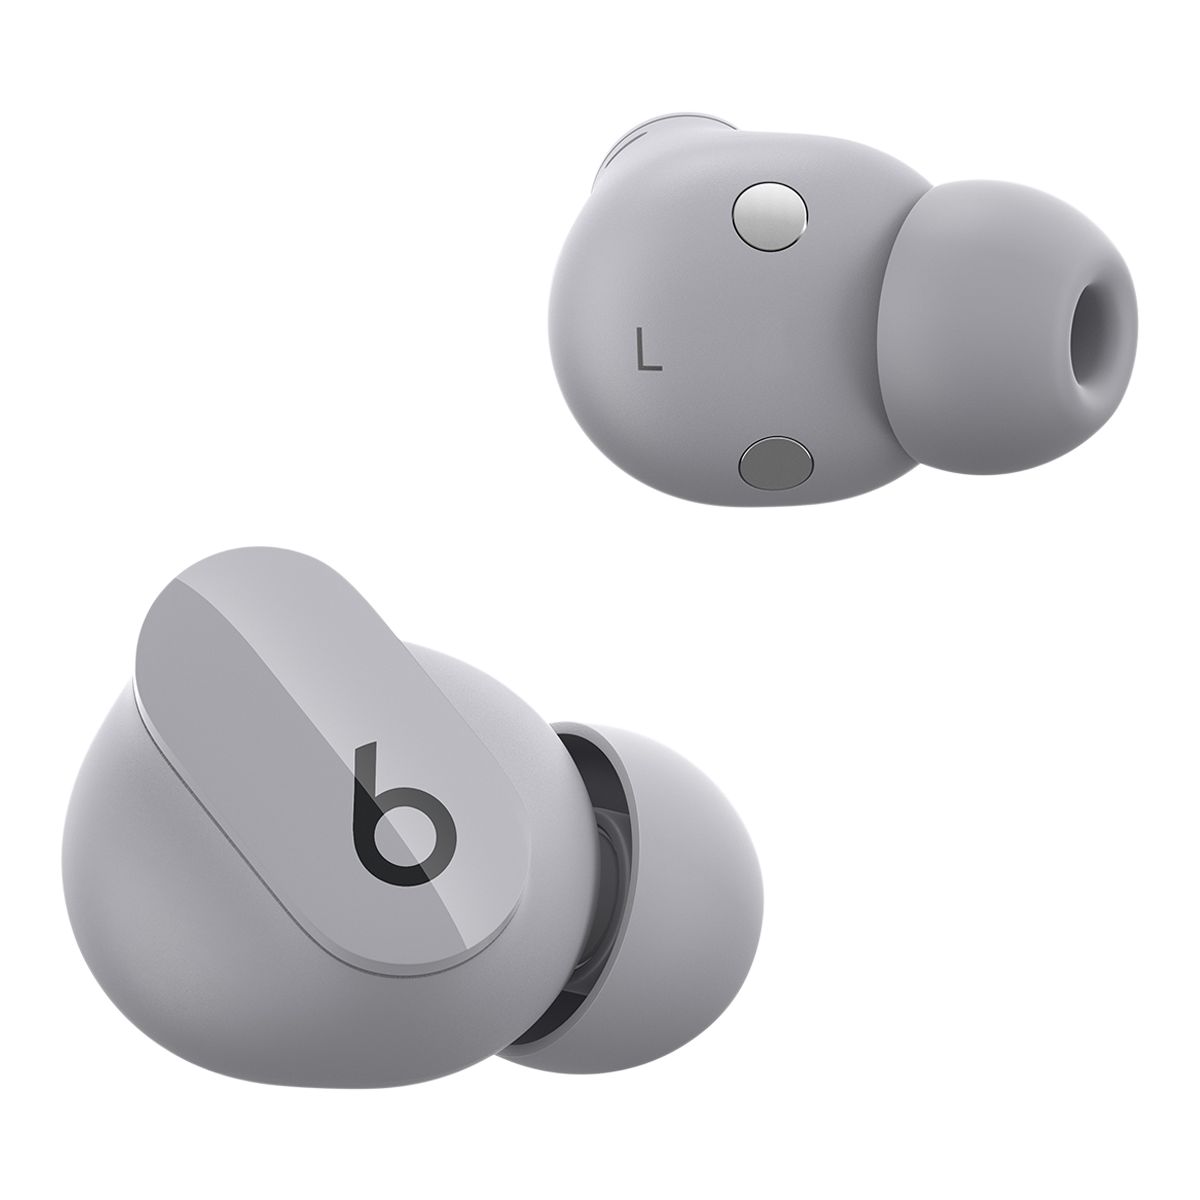 Beats Studio Buds Wireless In Ear Earbuds, Bluetooth, Noise Cancelling,  Water Resistant